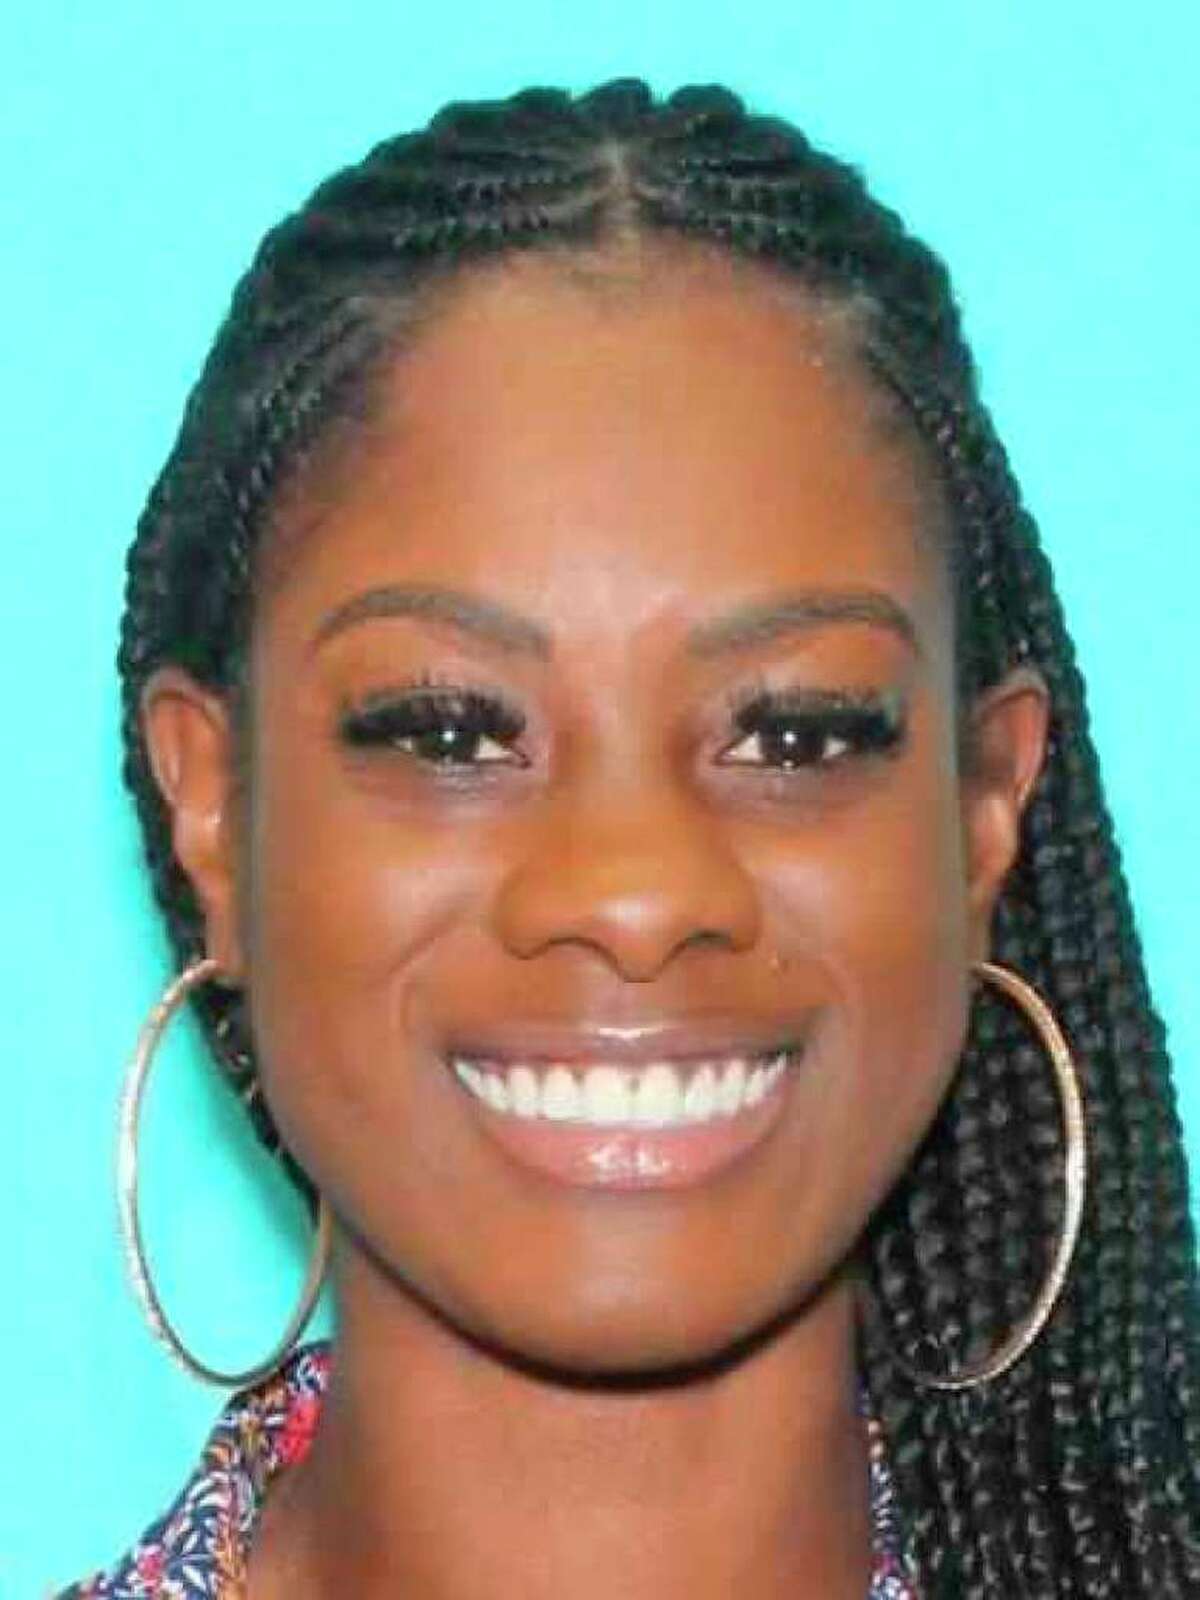 Andreen McDonald, 29, who owned a successful company operating two residential living facilities for senior citizens in San Antonio, disappeared Feb. 28, 2019. Her husband has been accused of killing her.